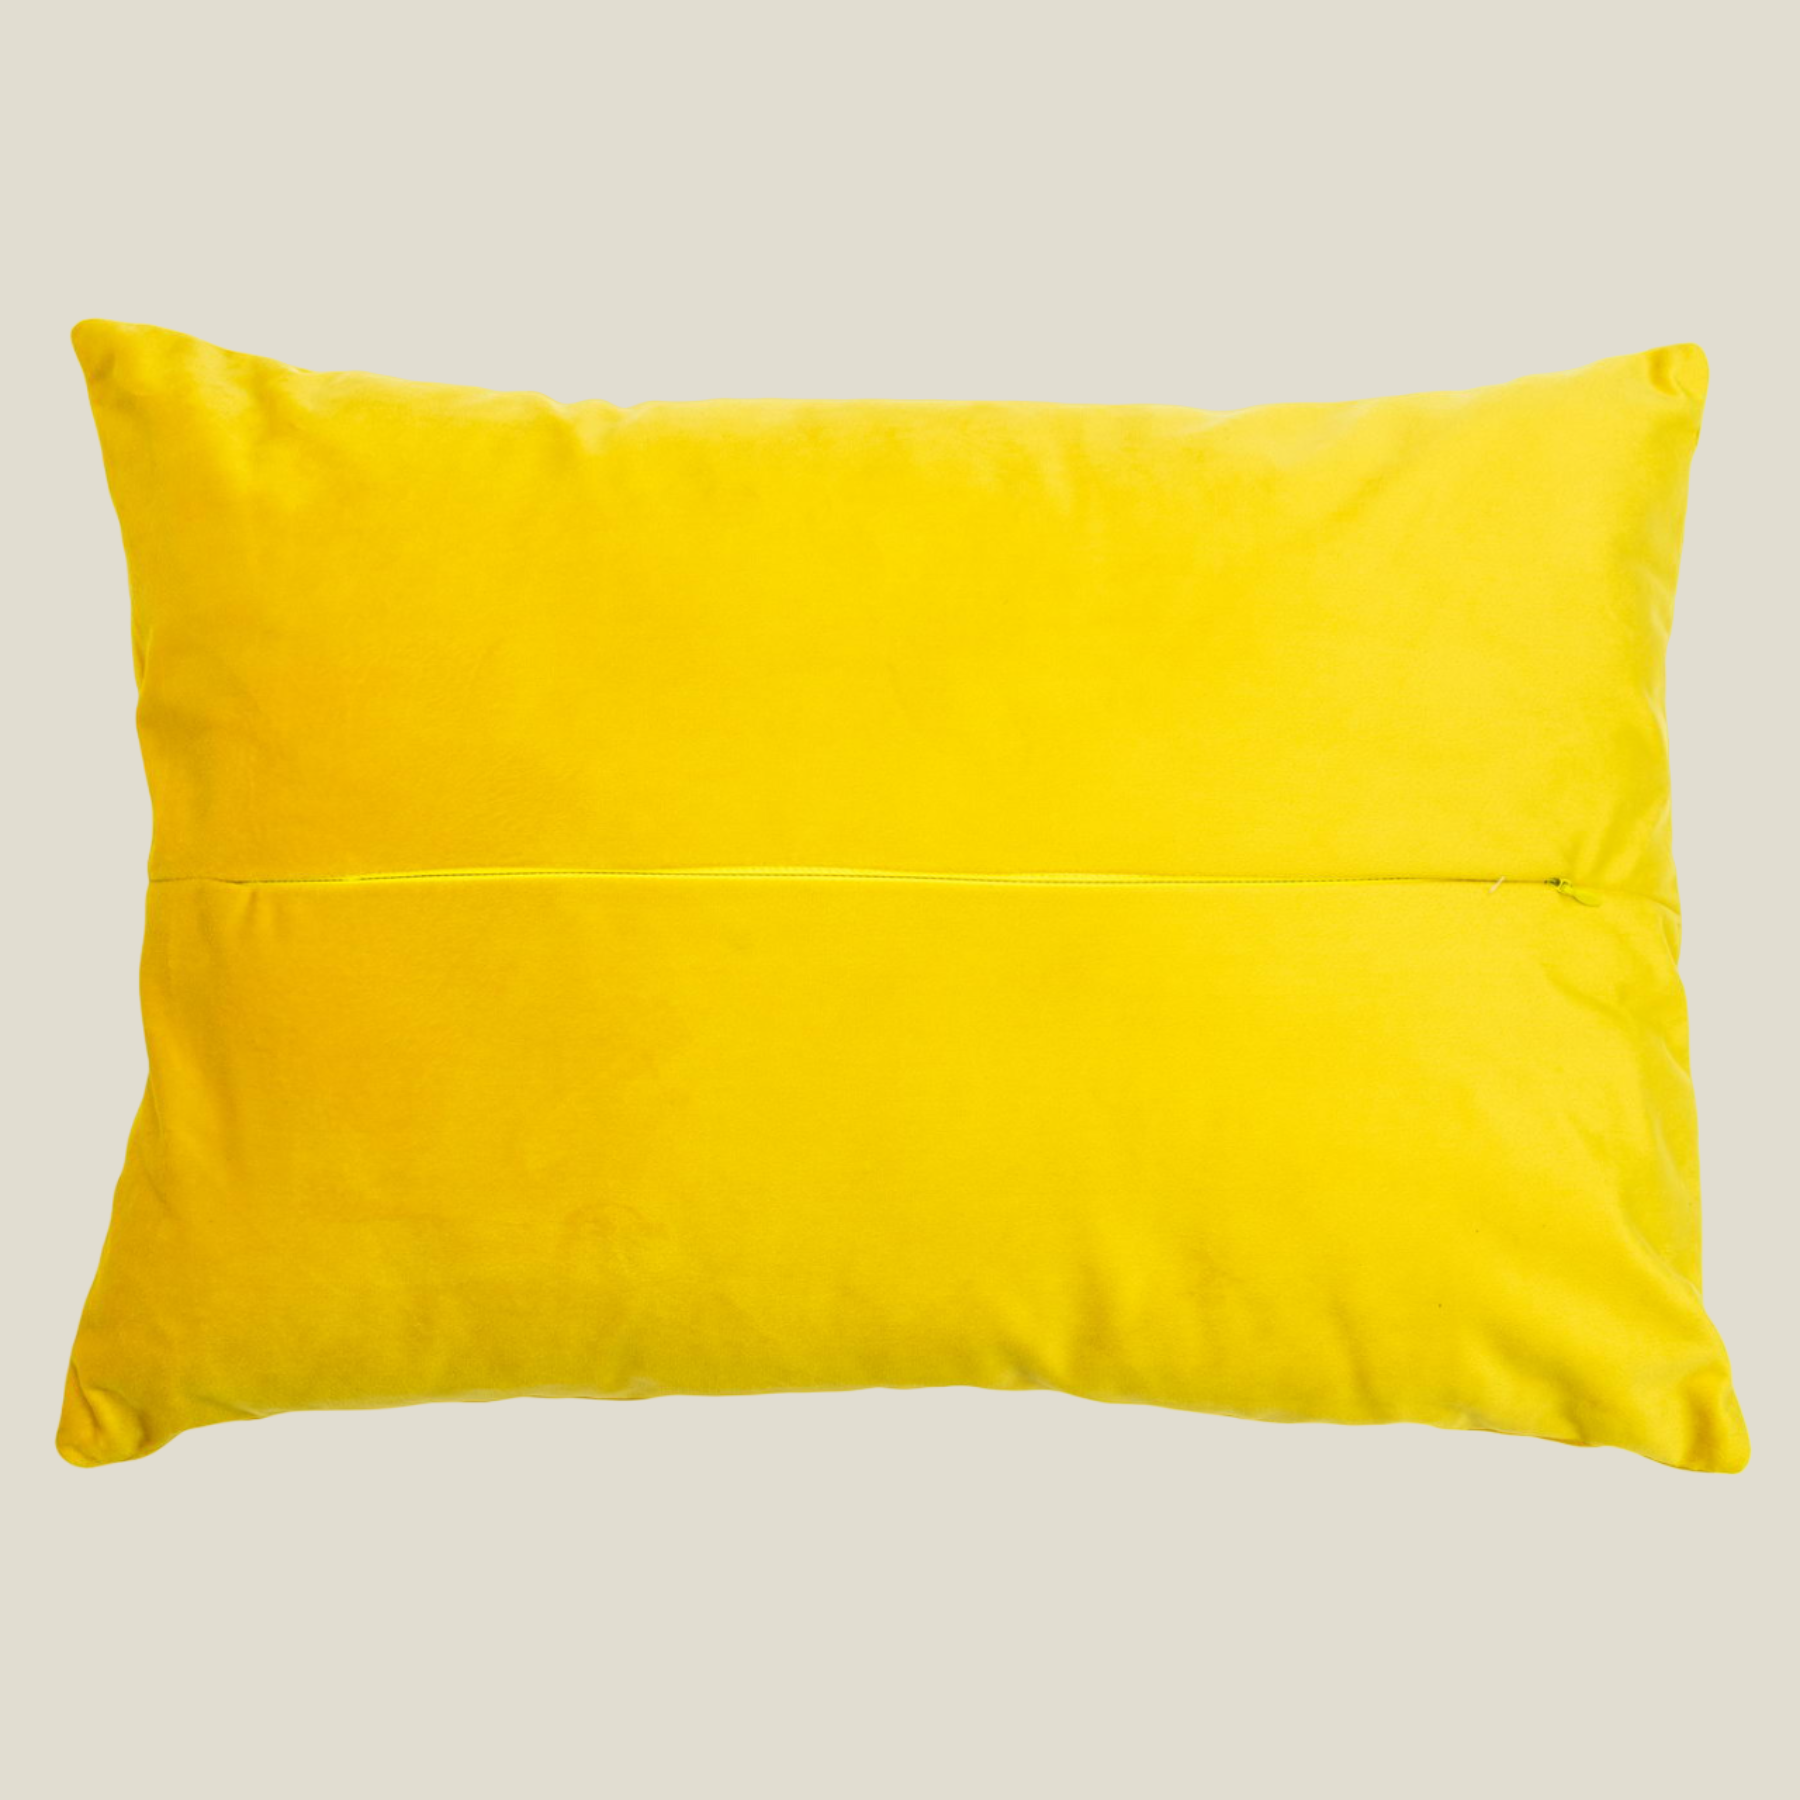 The Luxelife Yellow Velvet Floral Fully Embroidered Cushion Cover